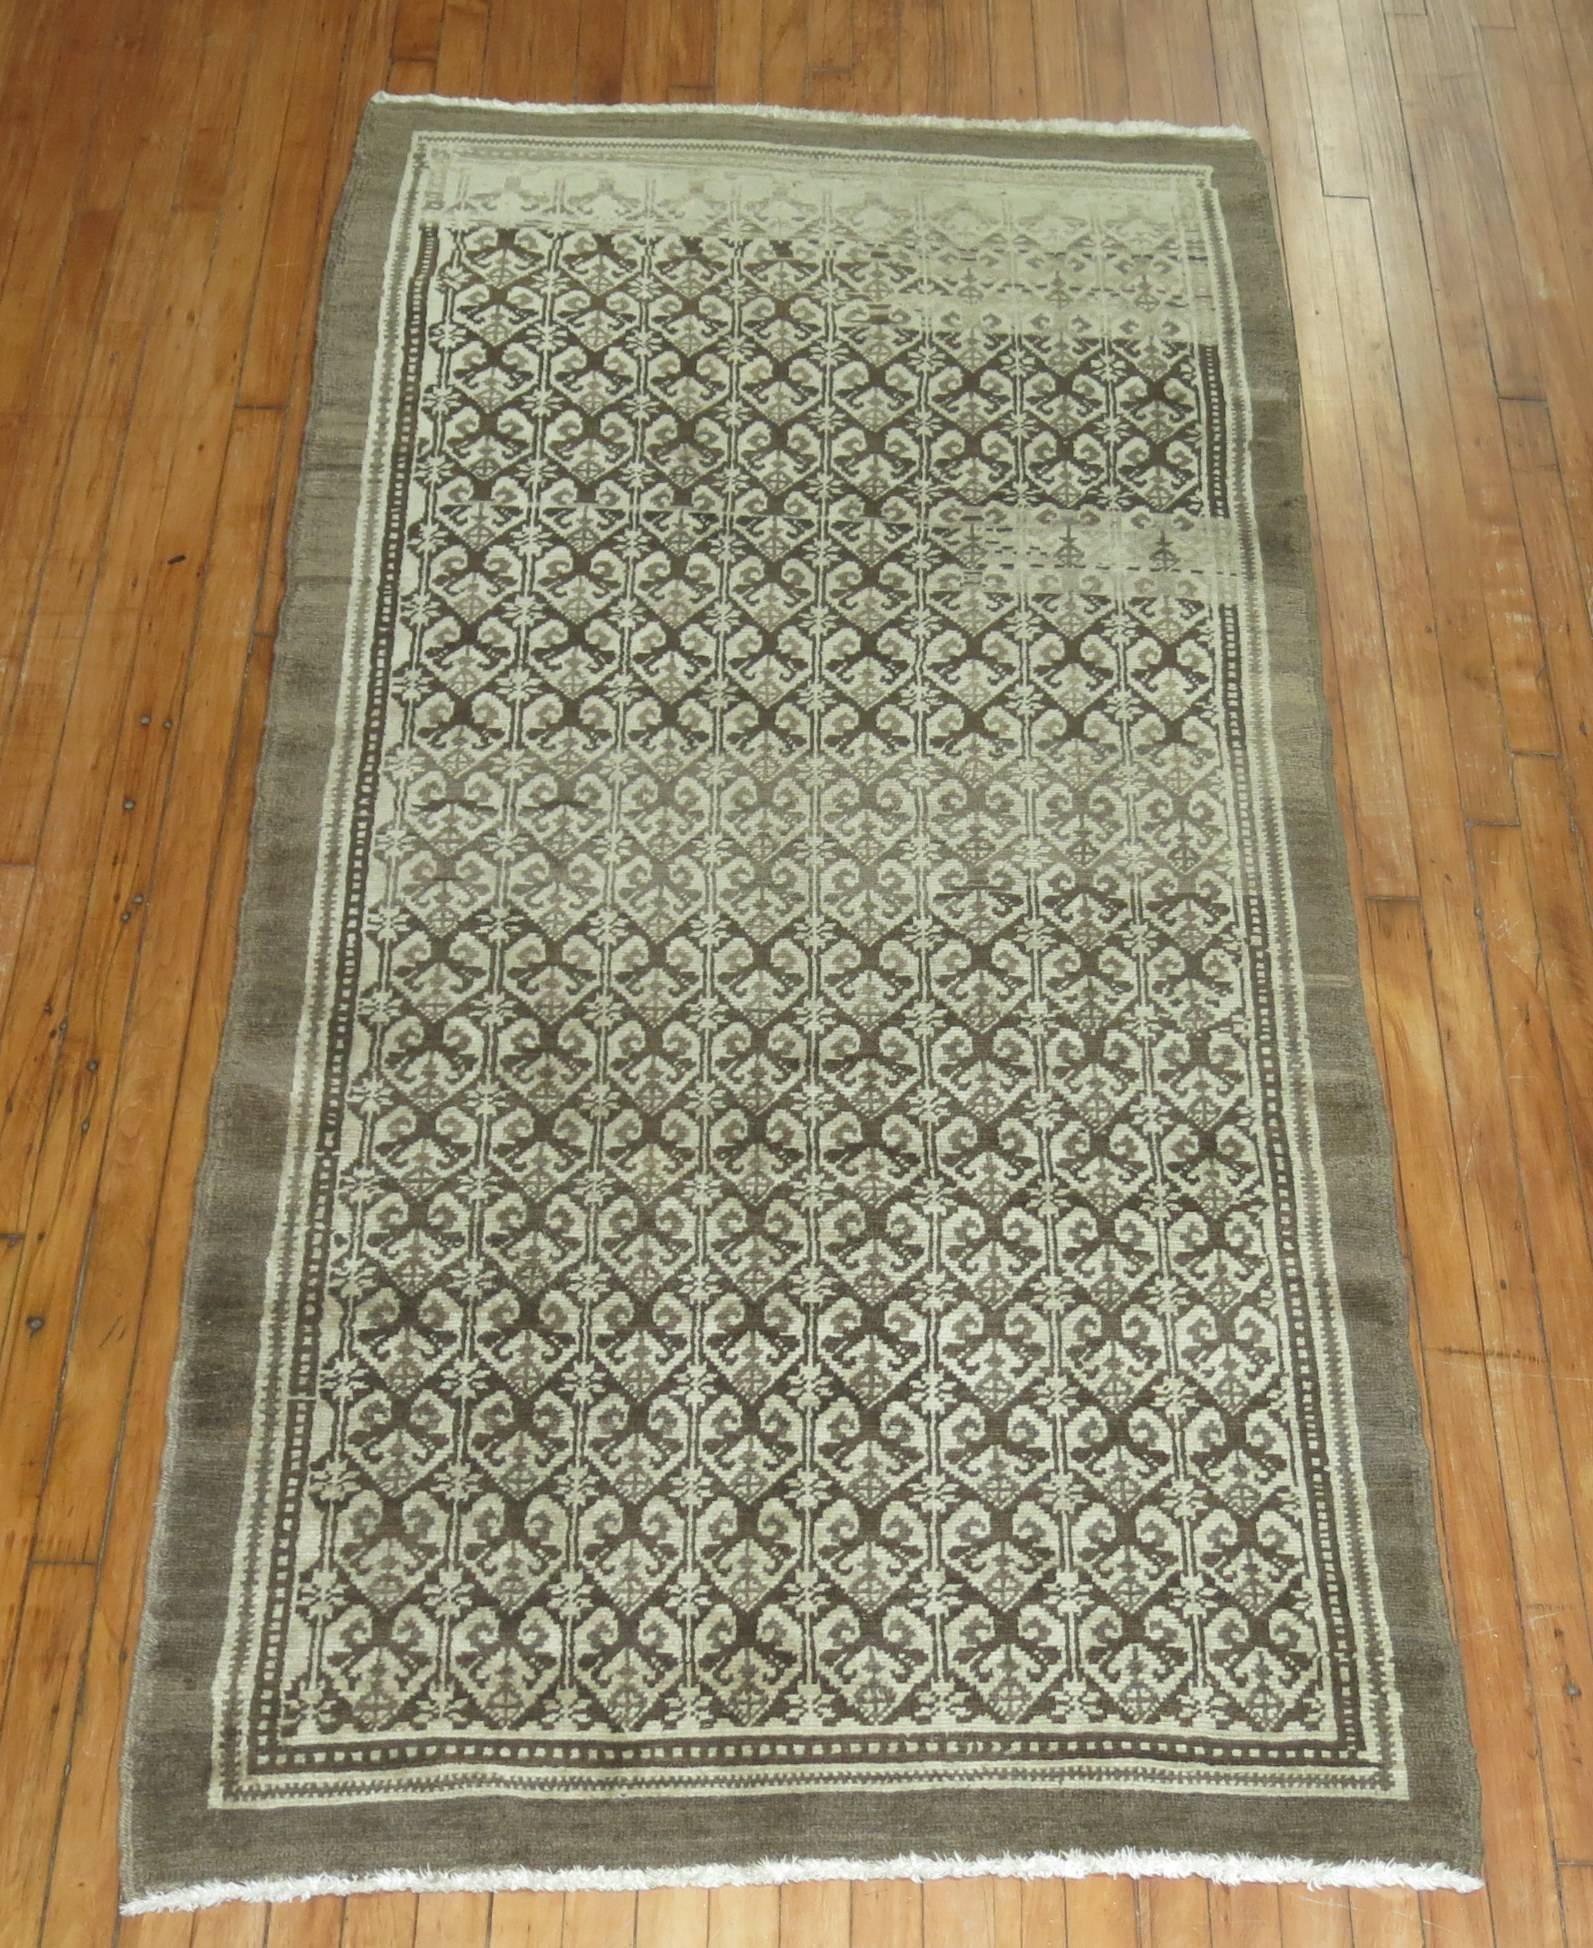 One of a kind vintage Turkish village rug in brown and ivory hues, circa mid-20th century.

Size: 3'7” x 7'4”.